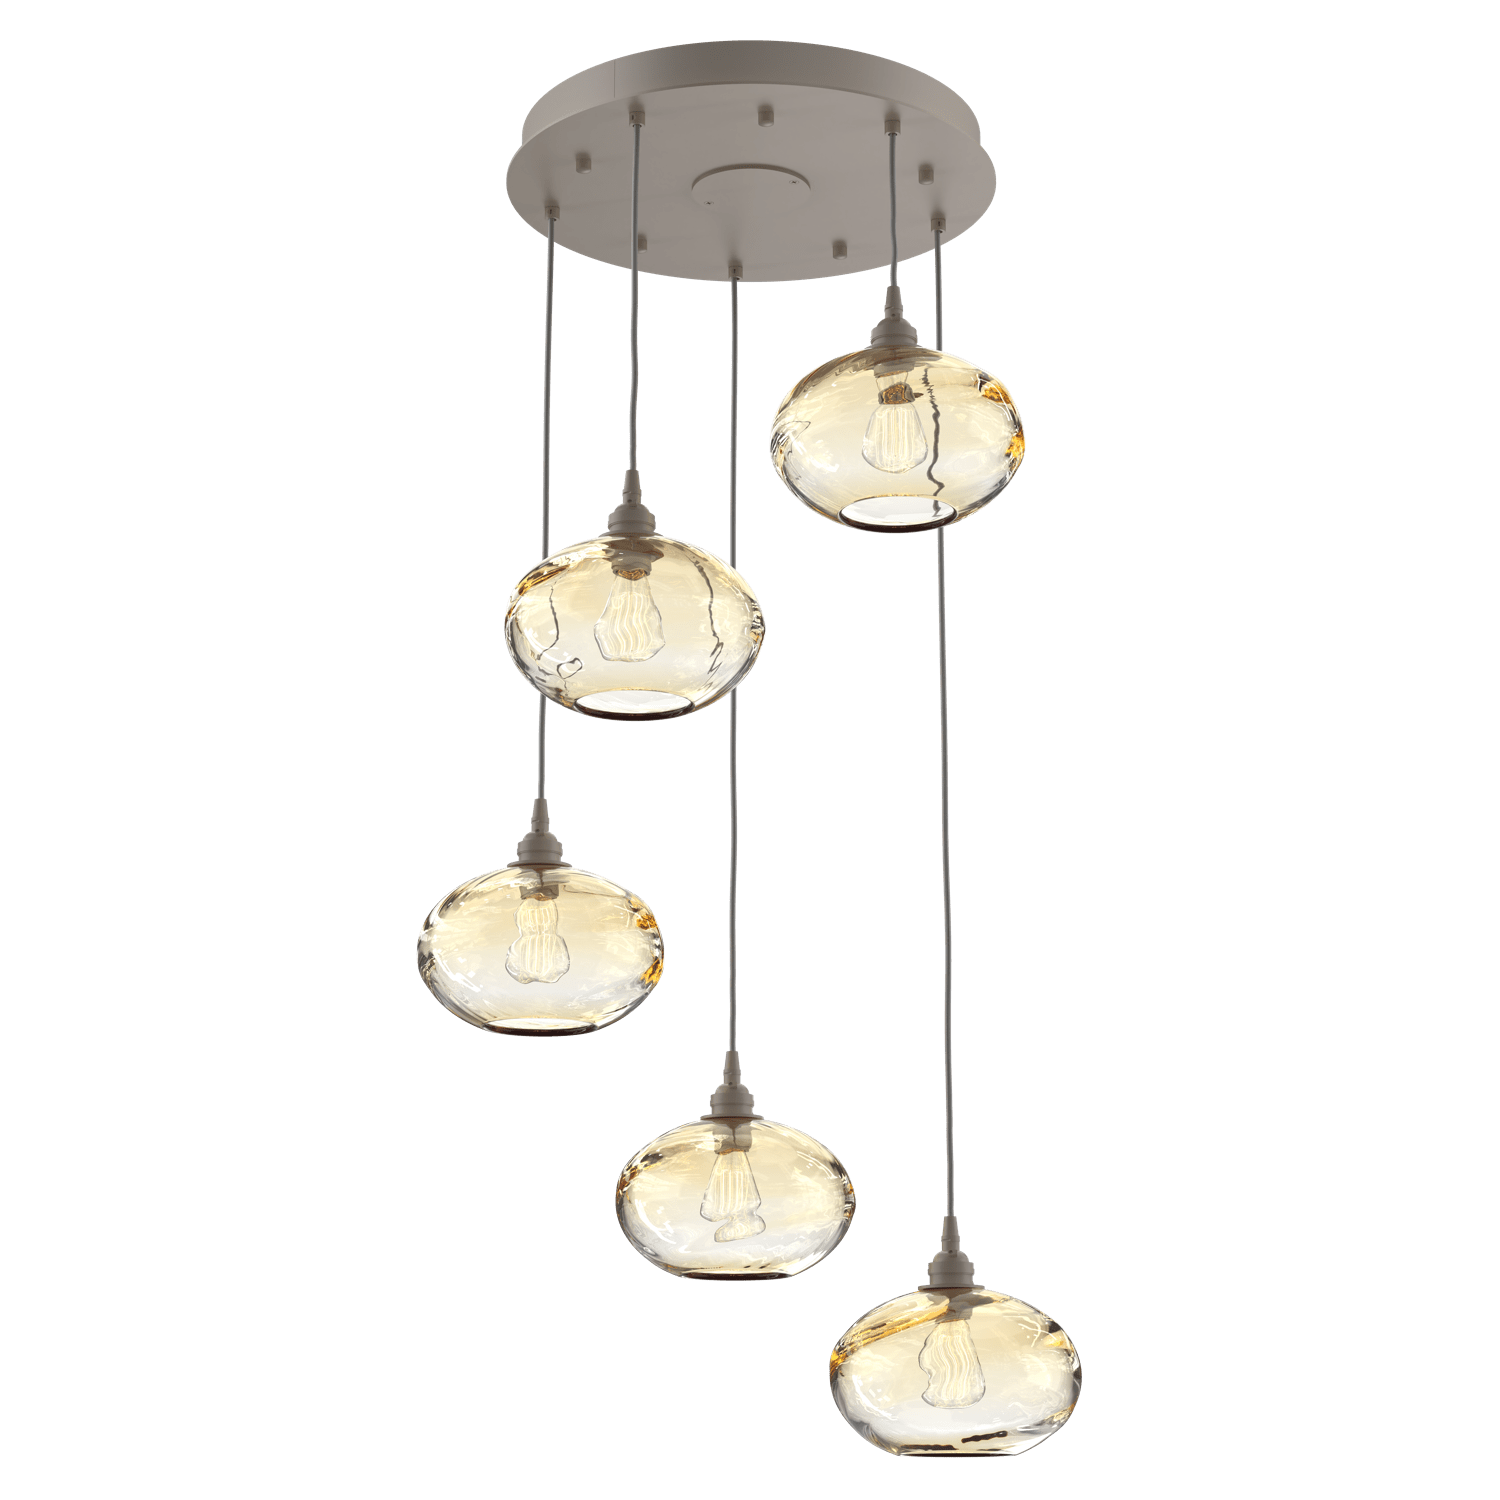 CHB0036-05-BS-OA-Hammerton-Studio-Optic-Blown-Glass-Coppa-5-light-round-pendant-chandelier-with-metallic-beige-silver-finish-and-optic-amber-blown-glass-shades-and-incandescent-lamping